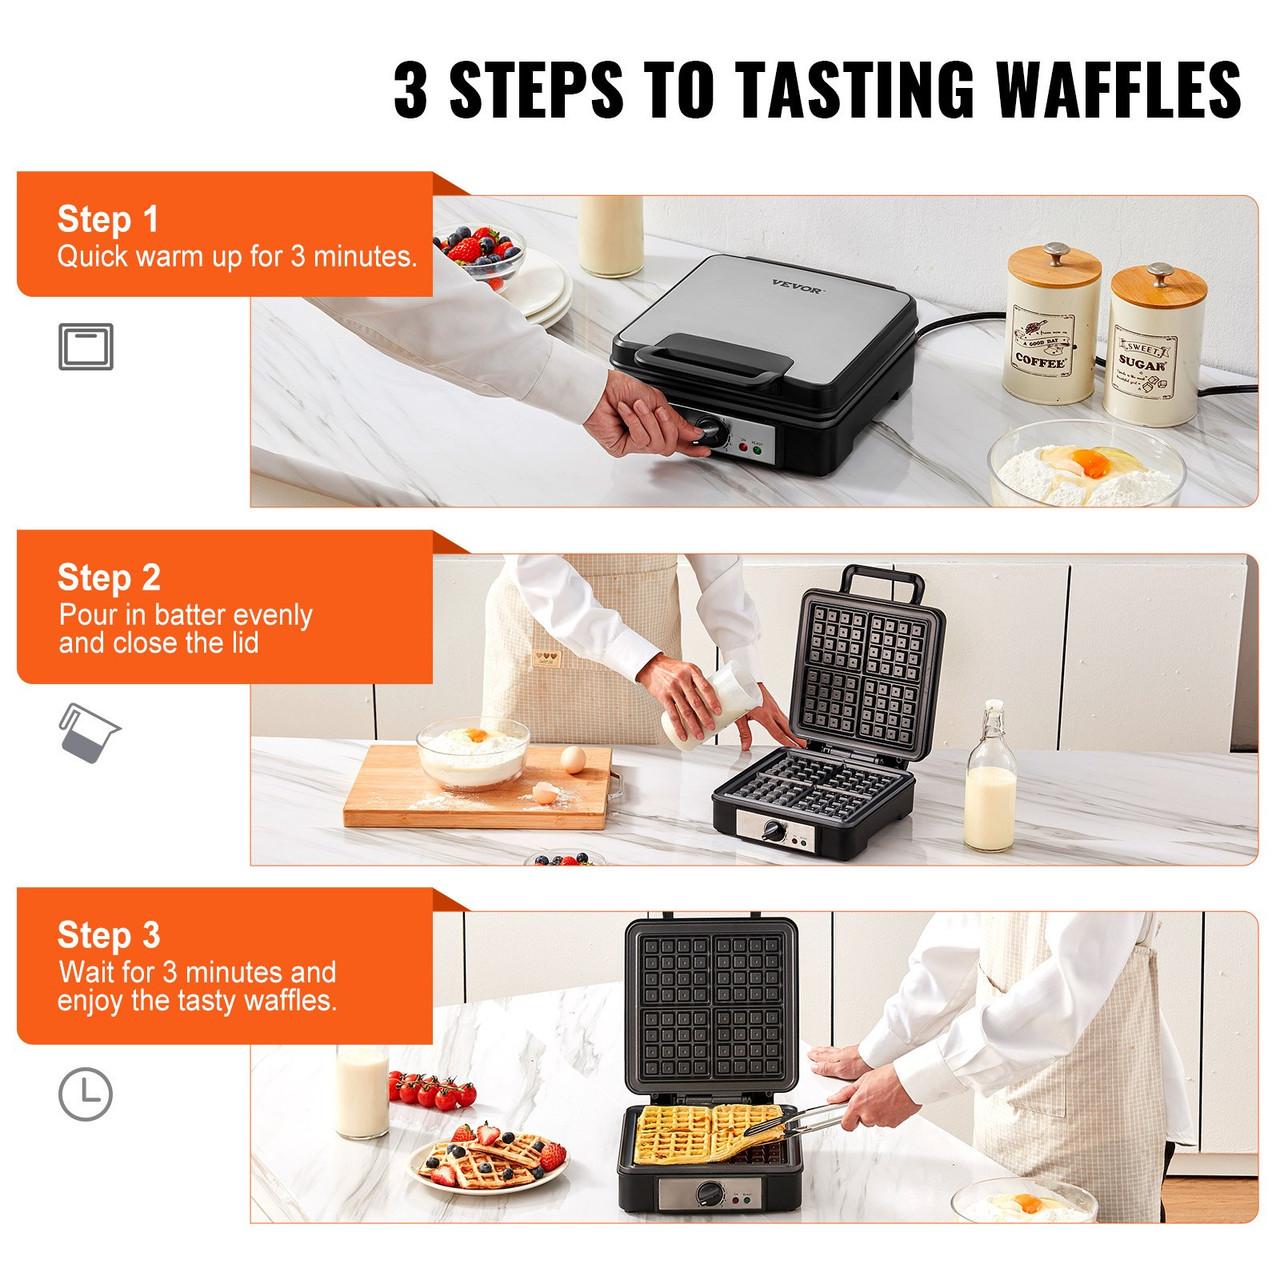 VEVOR Waffle Maker, 4 Slices per Batch, 1200W Square Waffle Iron, Non-Stick Waffle Baker Machine with 122-572? / 50-300? Temperature Range Teflon-Coated Baking Pans Stainless Steel Body, 120V